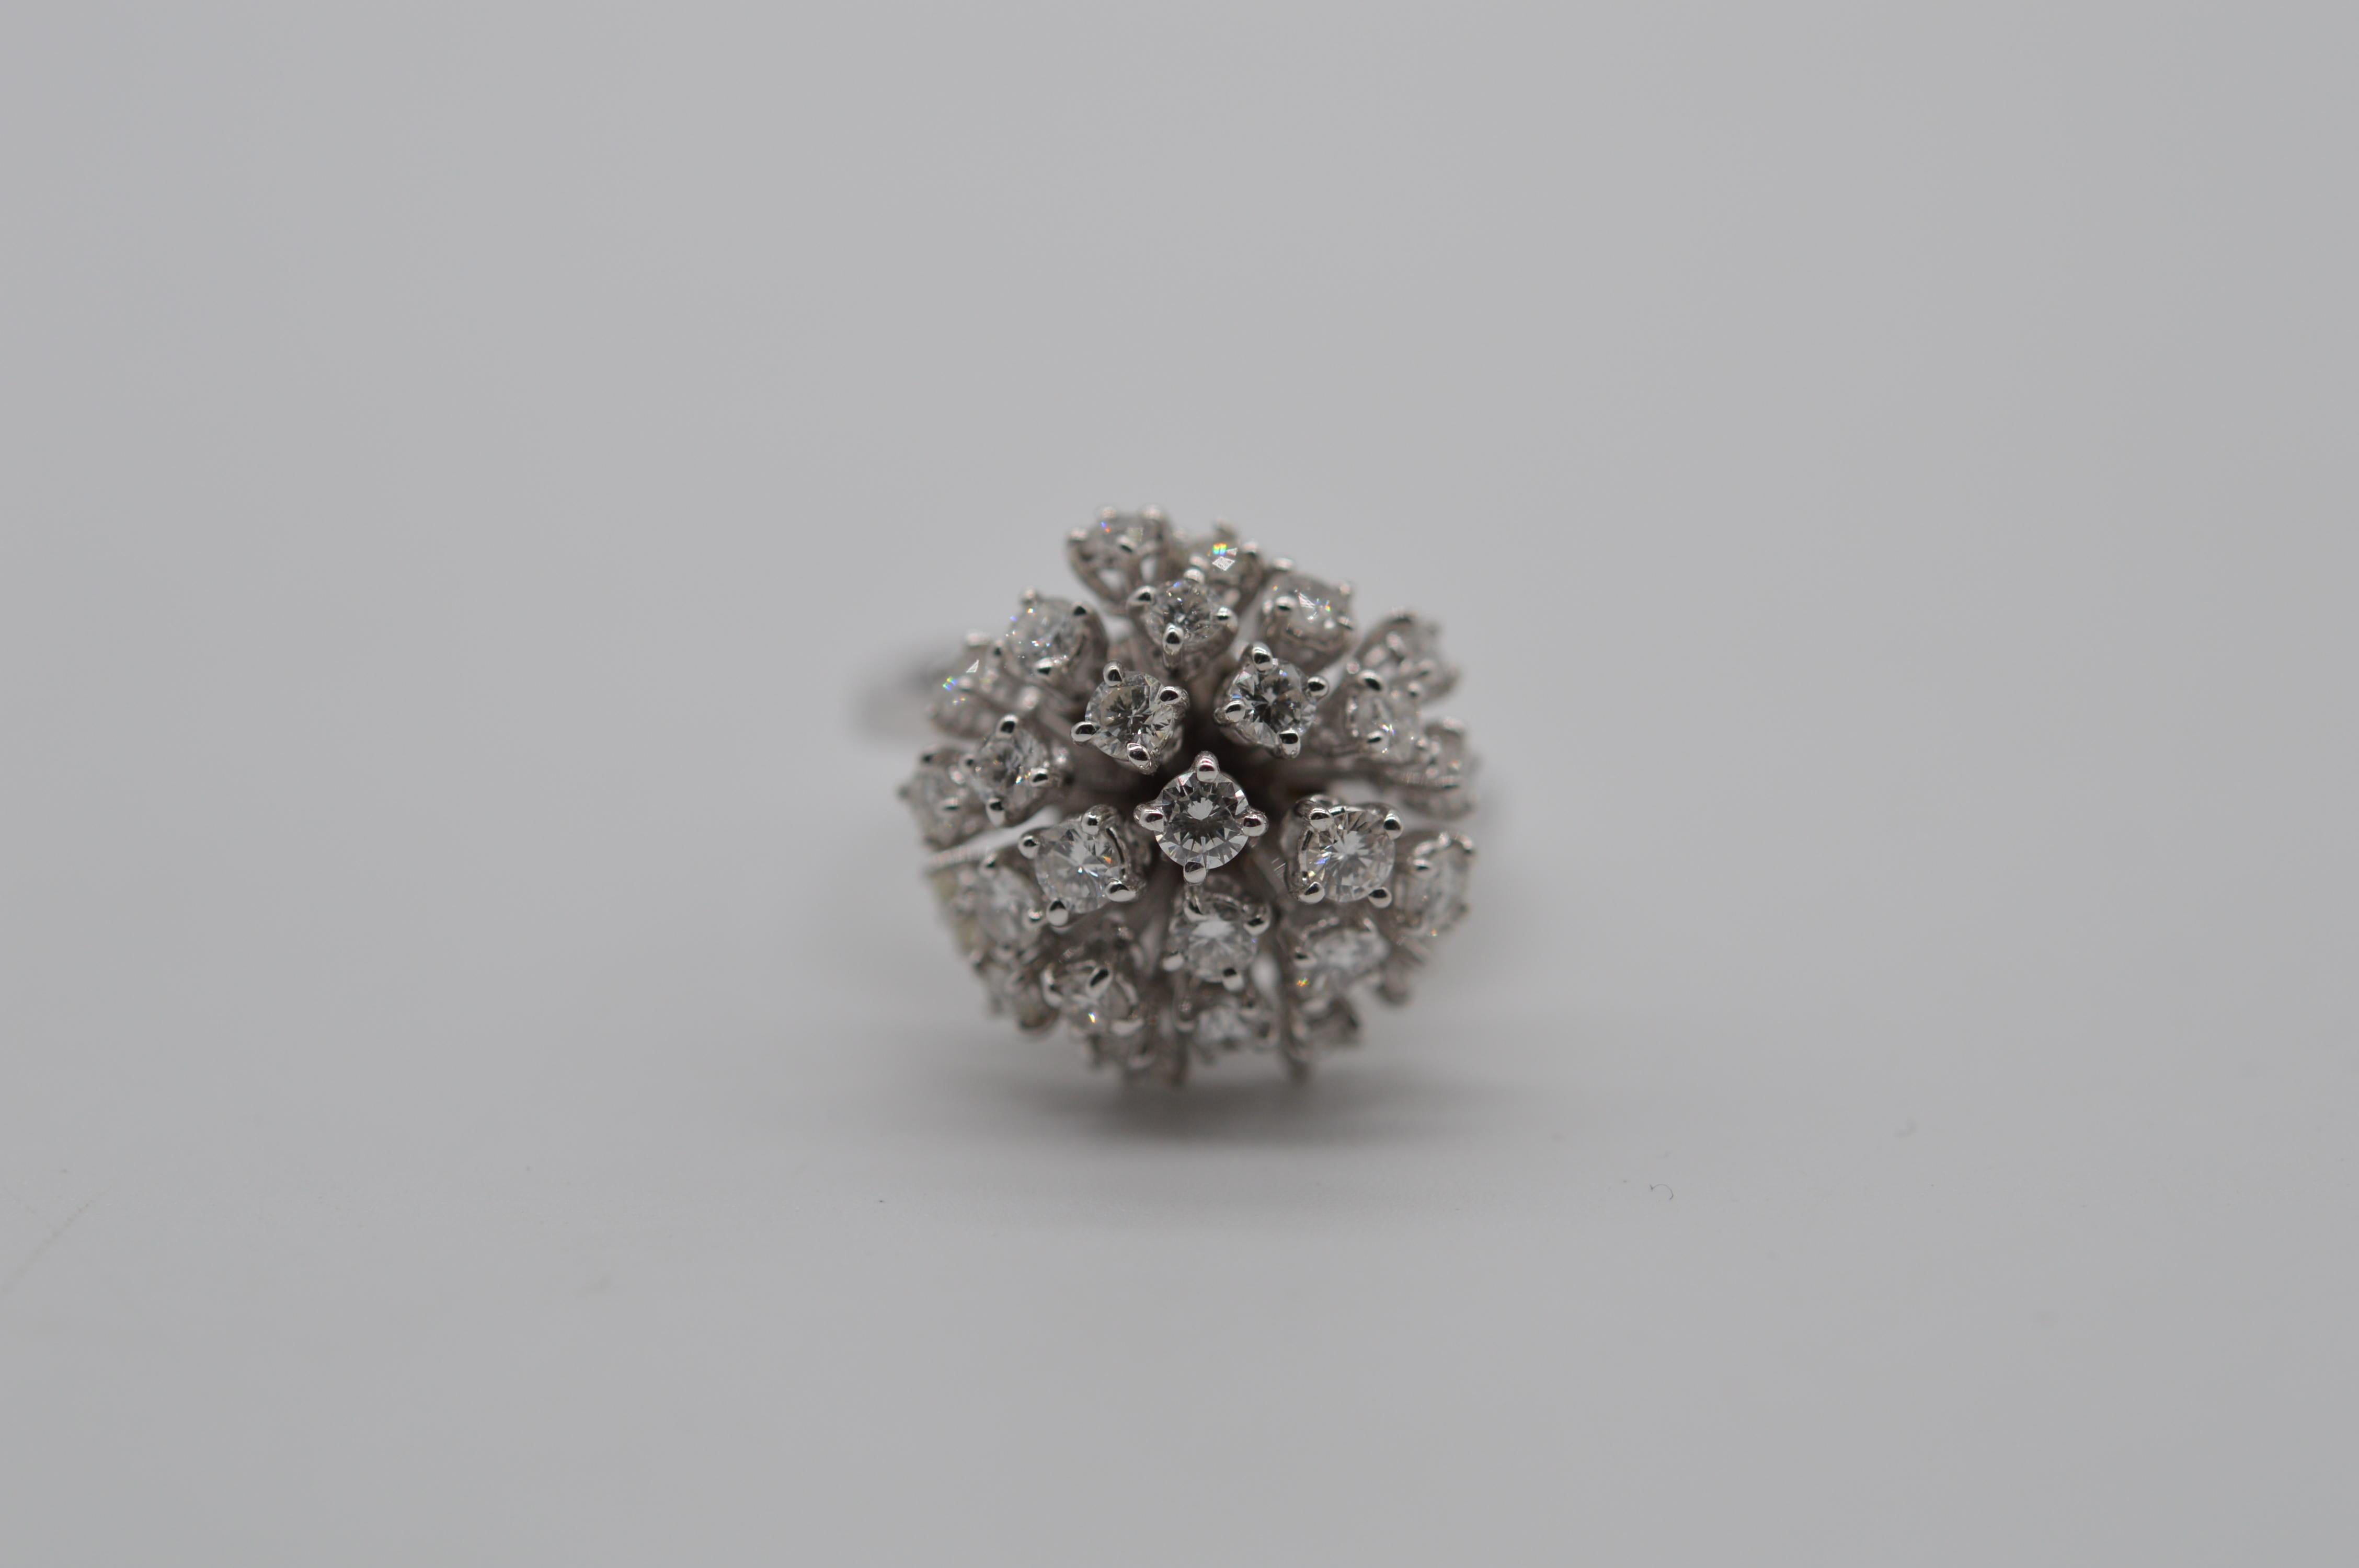 Diamond Moving Flowe Ring 1.73 carats Unworn
Mounted in an 18K White Gold
The ring size is 53.5
The total weight of the ring is 10 grams
Set with 28 Round Diamonds for a total weight of 1.73 carats
Unworn condition
